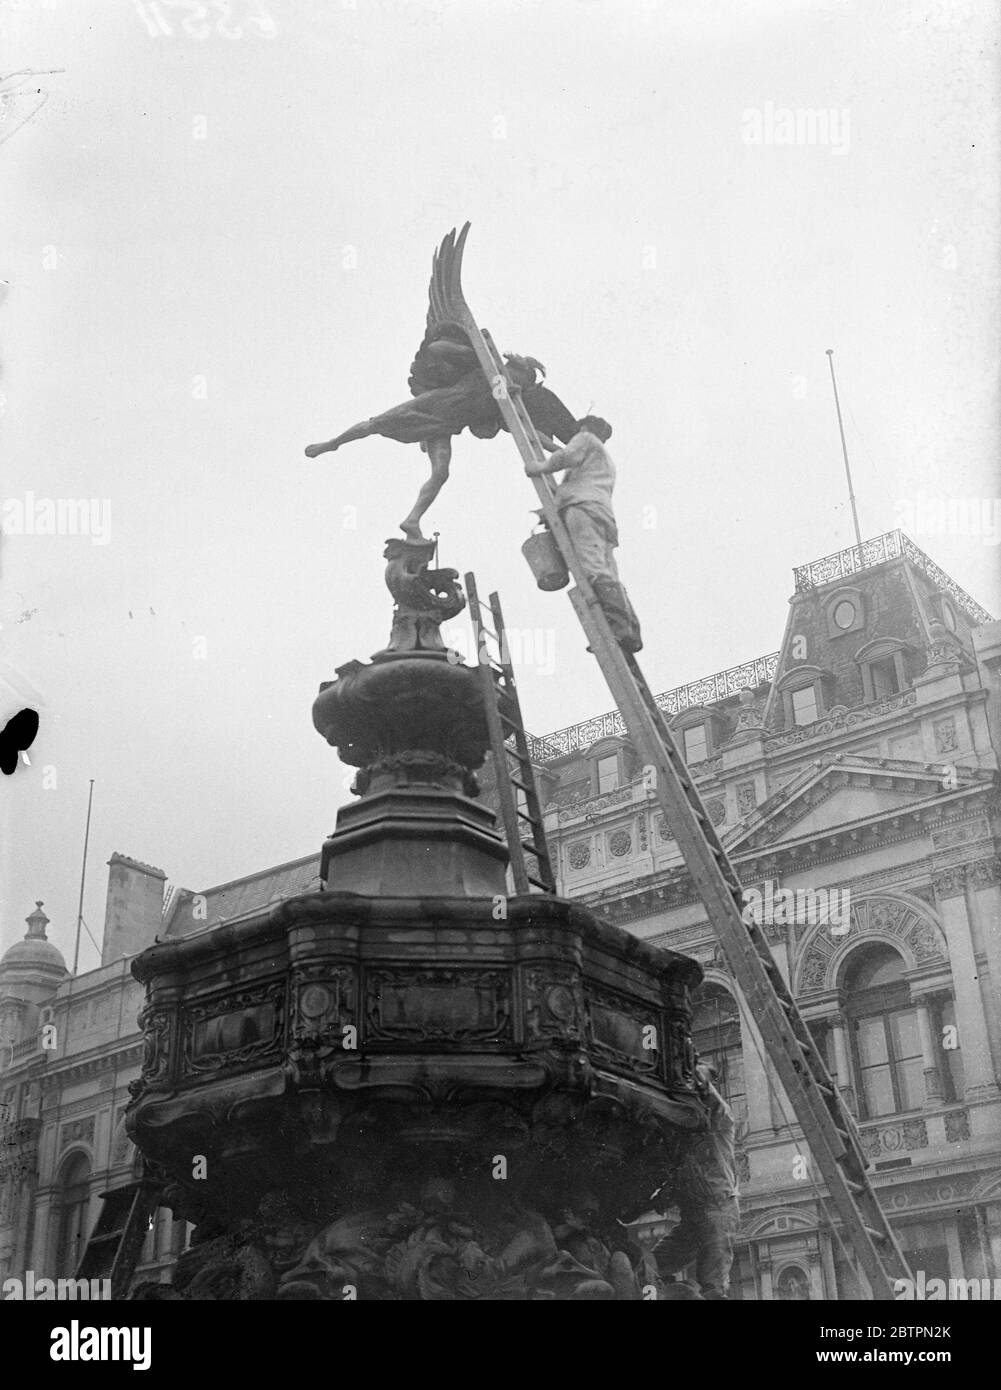 Eros brightened up for Coronation. You are in a workmen giving the Eros statue in Piccadilly Circus a 'Brush ups' so that he will give a bright welcome to the Coronation crowds. 16 April 1937 Stock Photo